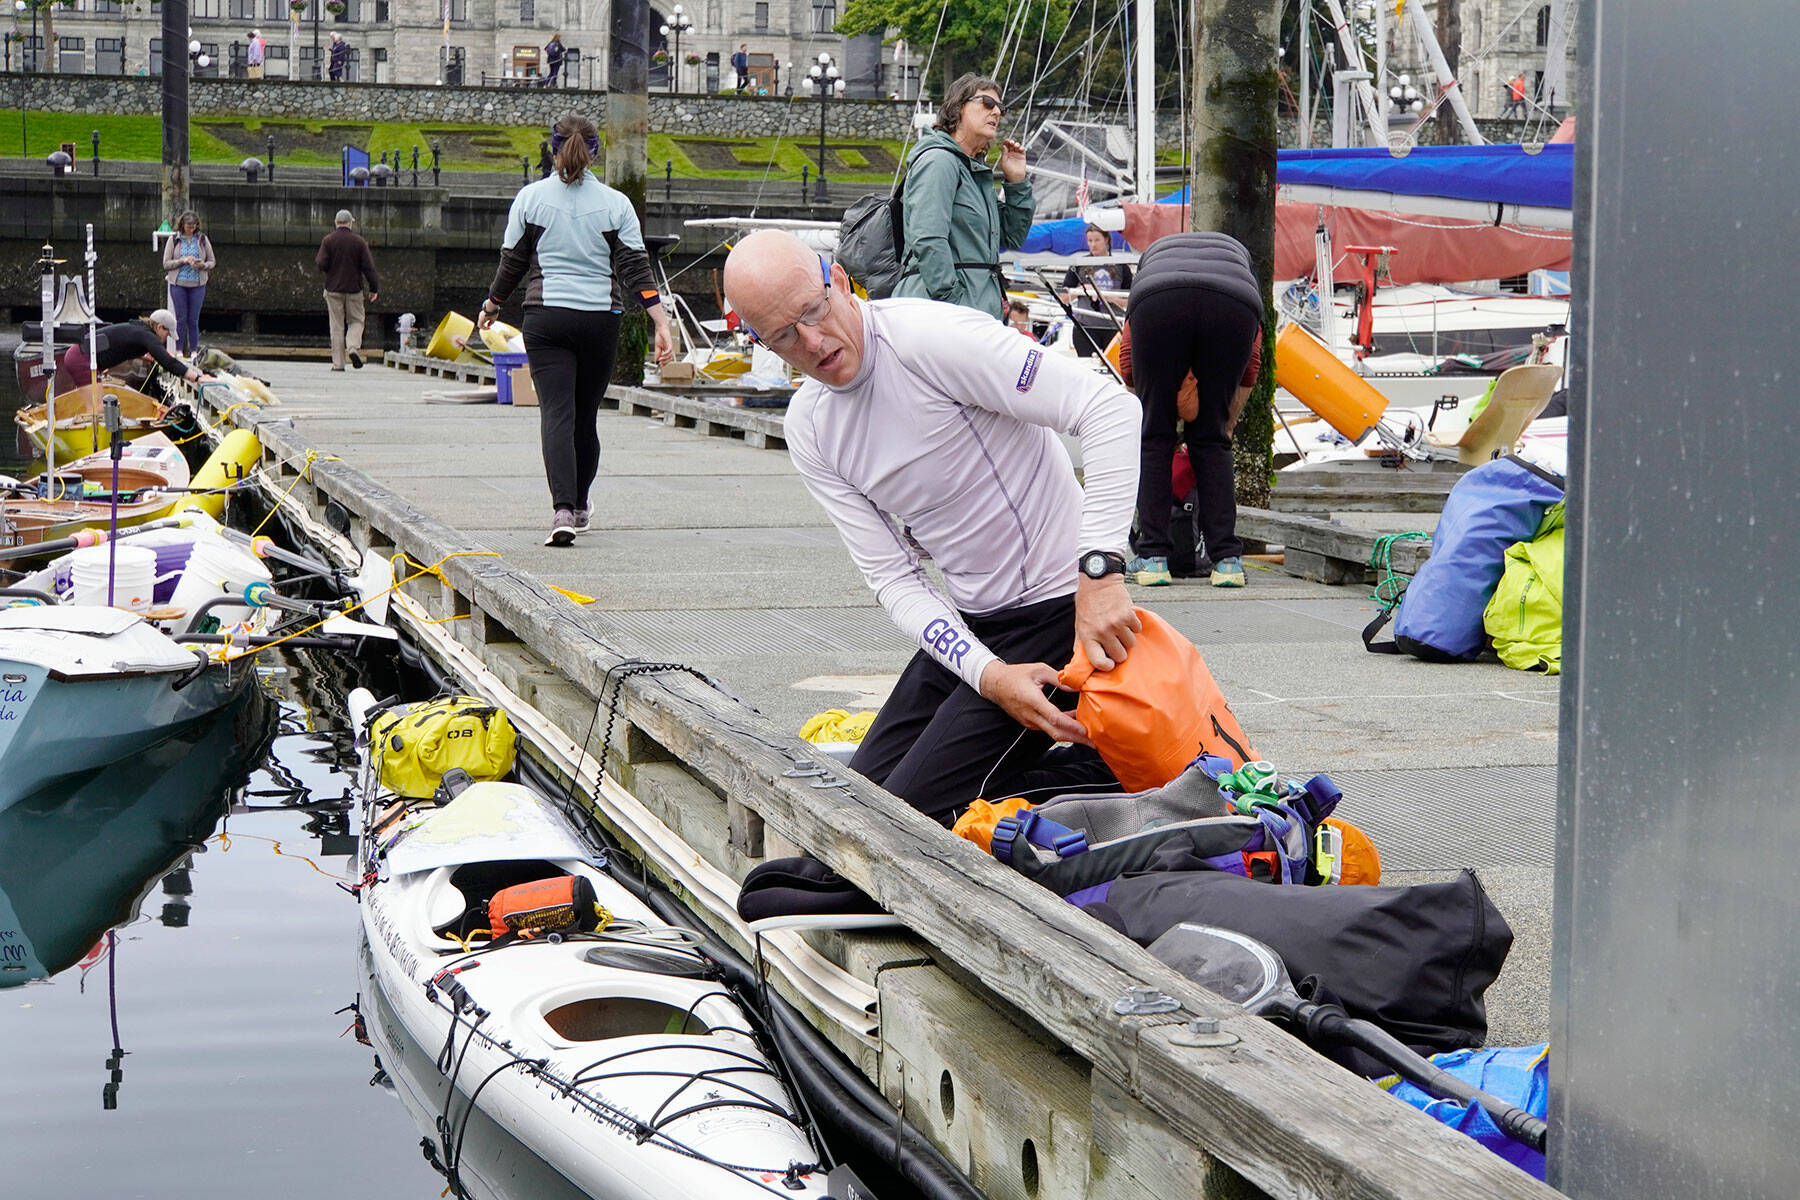 Bob McCall, from Great Britain, loads his kayak with supplies he will need for his 710-mile journey to Ketchikan, Alaska, during the 2022 Race 2 Alaska, which got underway at noon Thursday from Victoria Harbour. A self-described tracker junkie since the first race, McCall decided to enter the race in 2020 and ordered a kayak built in Victoria, but COVID-19 hit and canceled everything. This is the first time he was able to enter and he is looking forward to the adventure. (Steve Mullensky/for Peninsula Daily News)